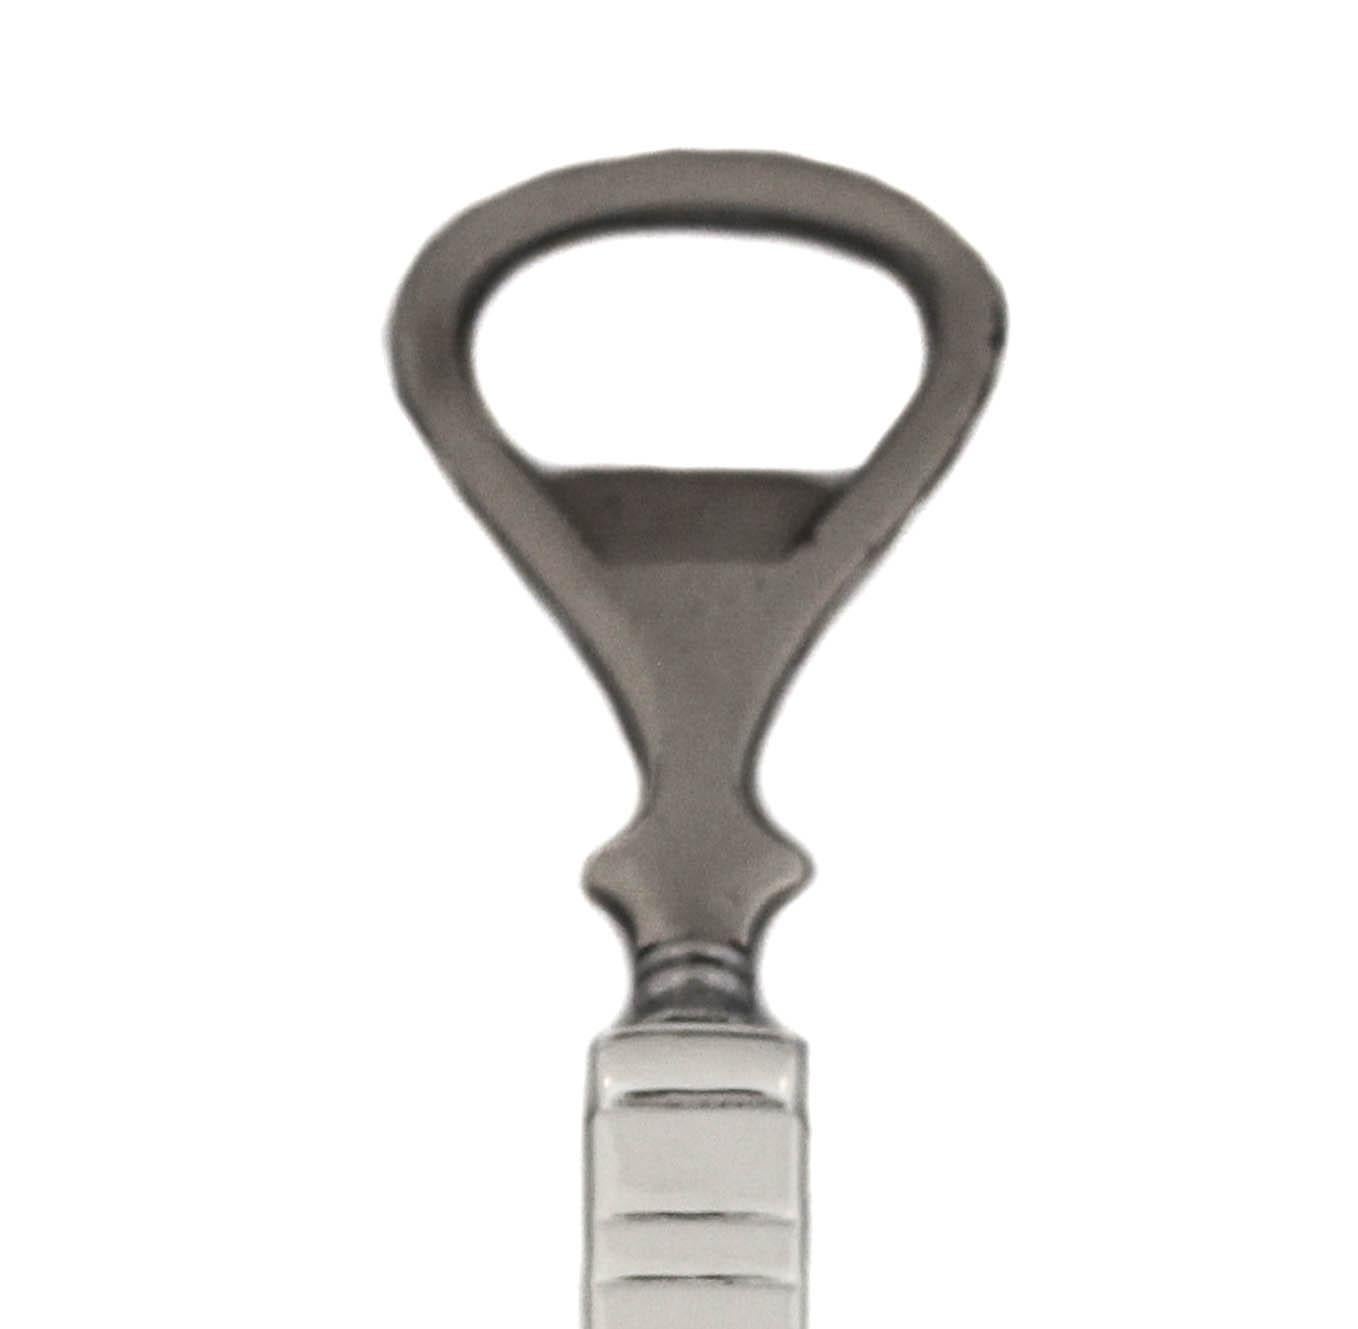 Barware is very in now and sterling silver barware is especially sexy! We think this sterling silver bottle opener will look fabulous on your bar-cart and will make a nice addition to your collection. A great gift for someone who loves entertaining